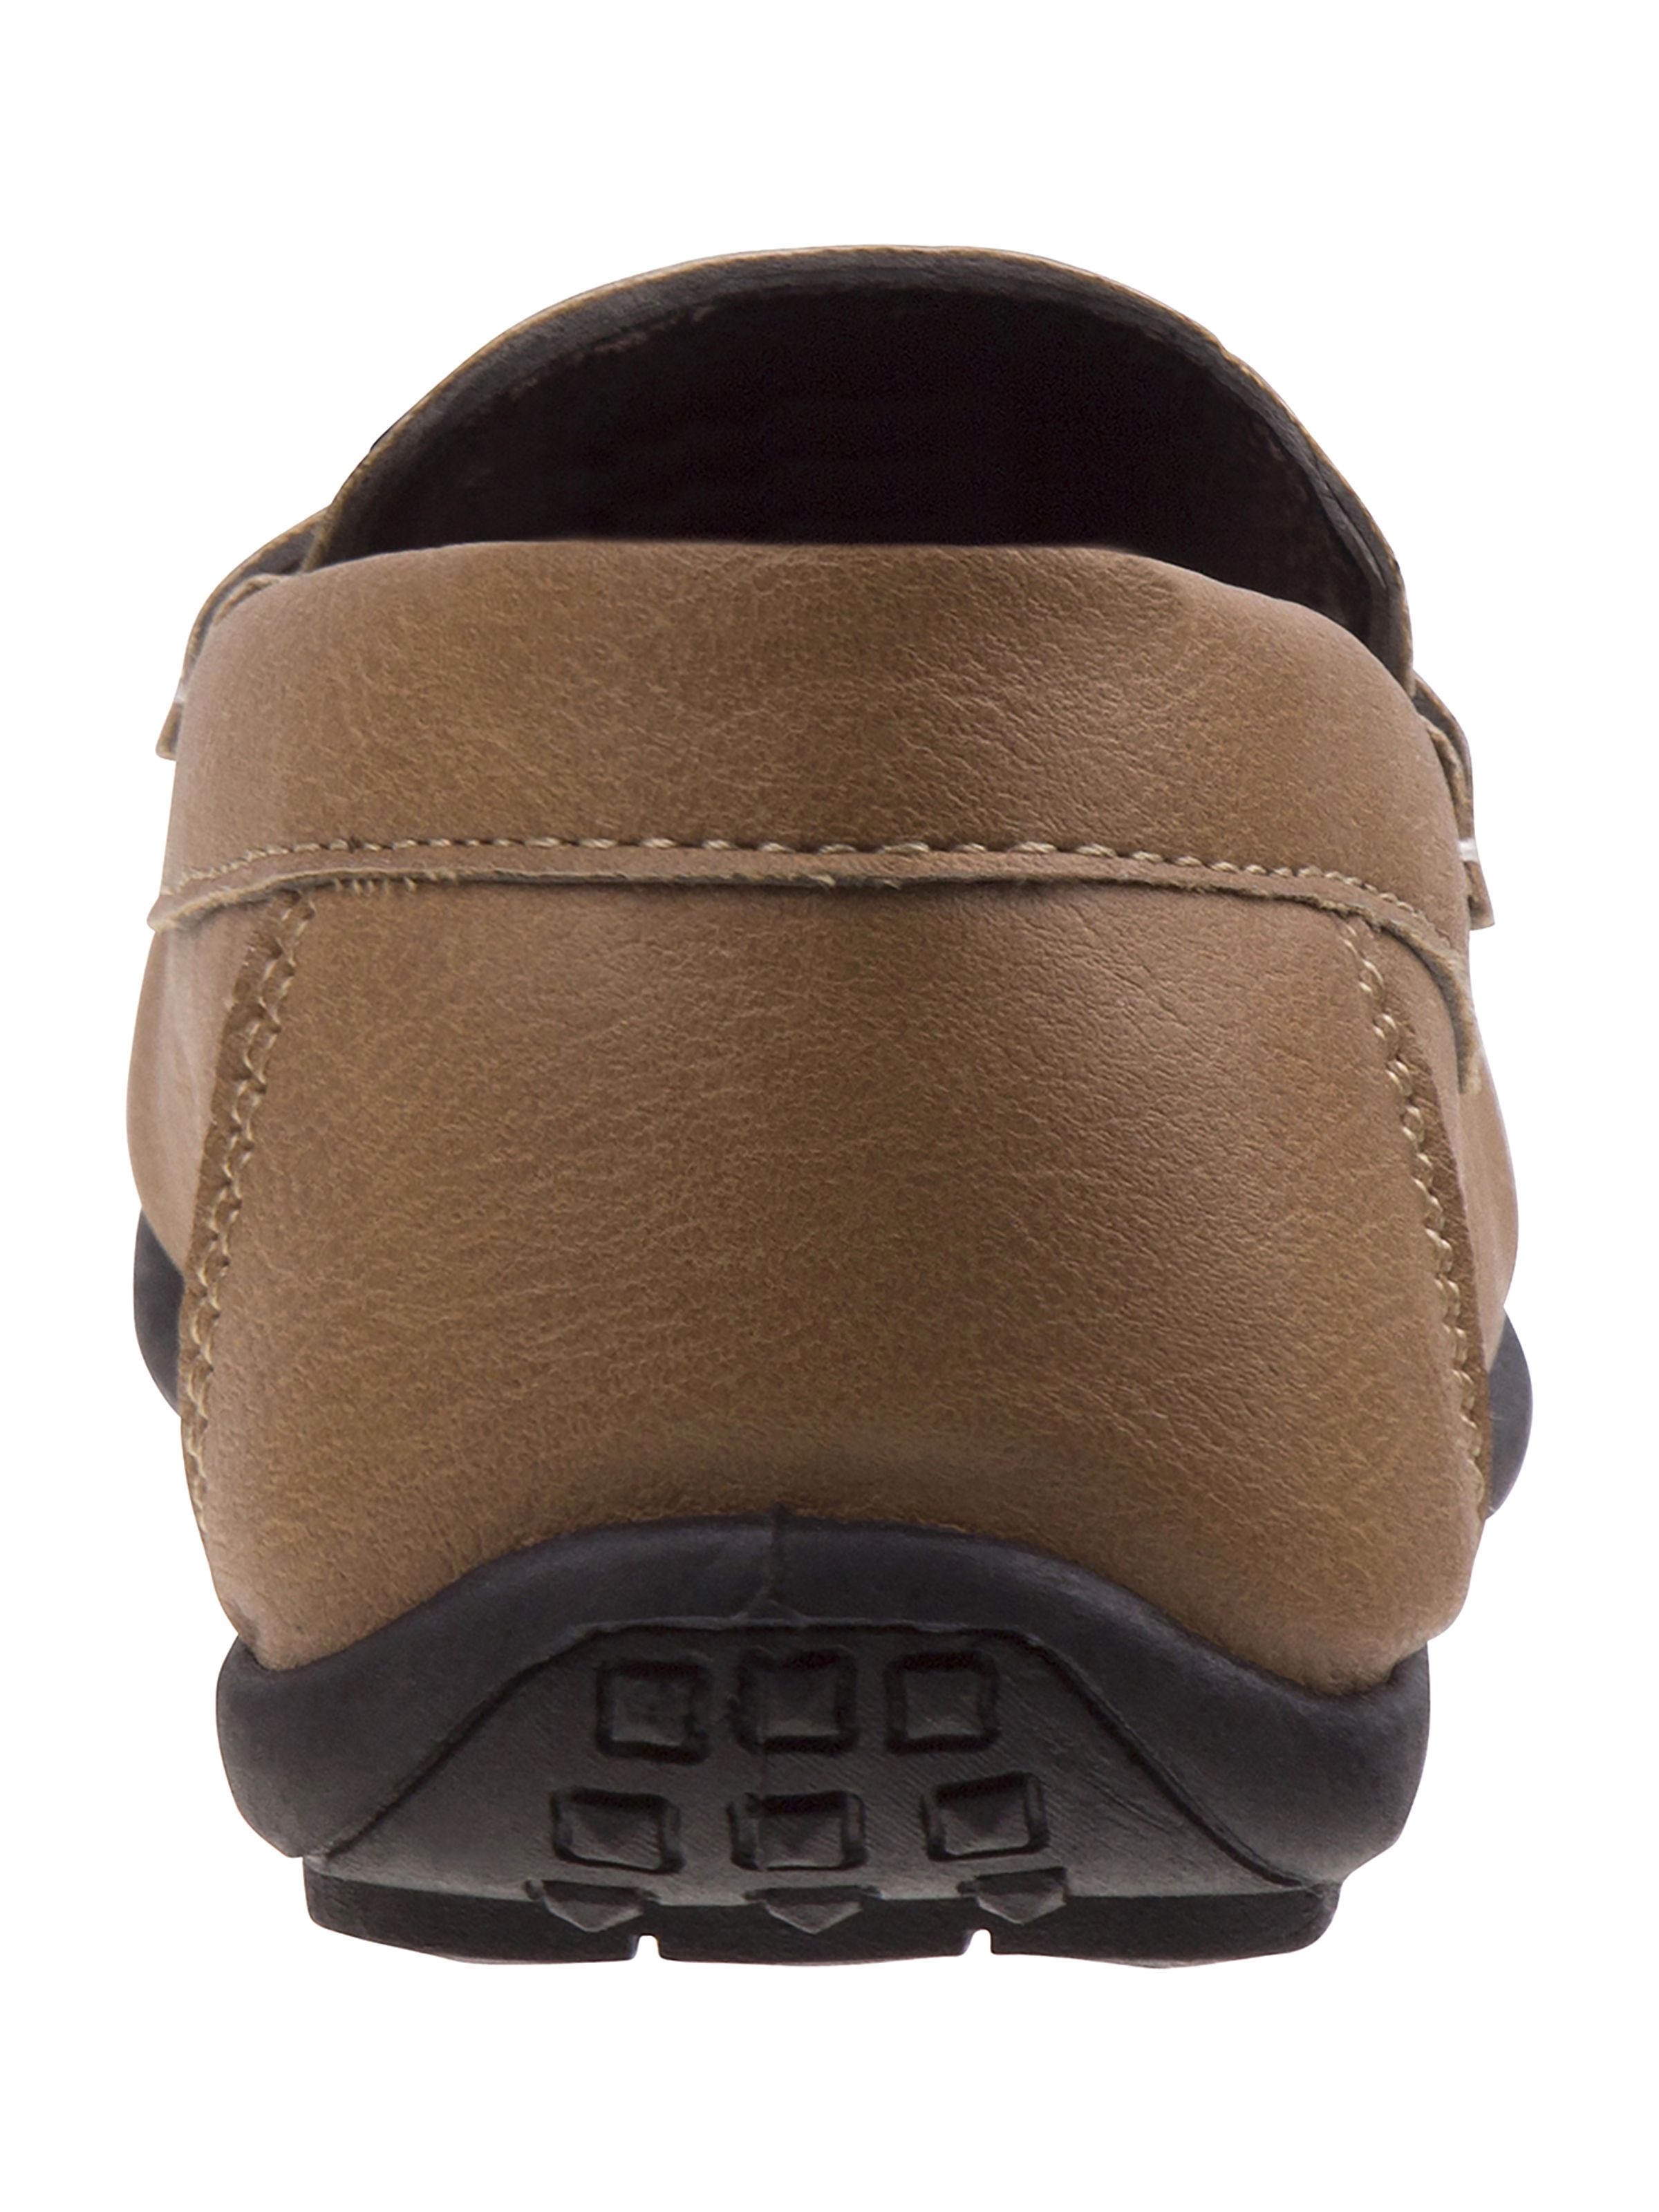 Josmo Boys Slip On Casual Shoes. (Little Kids/Big Kids) - image 3 of 5